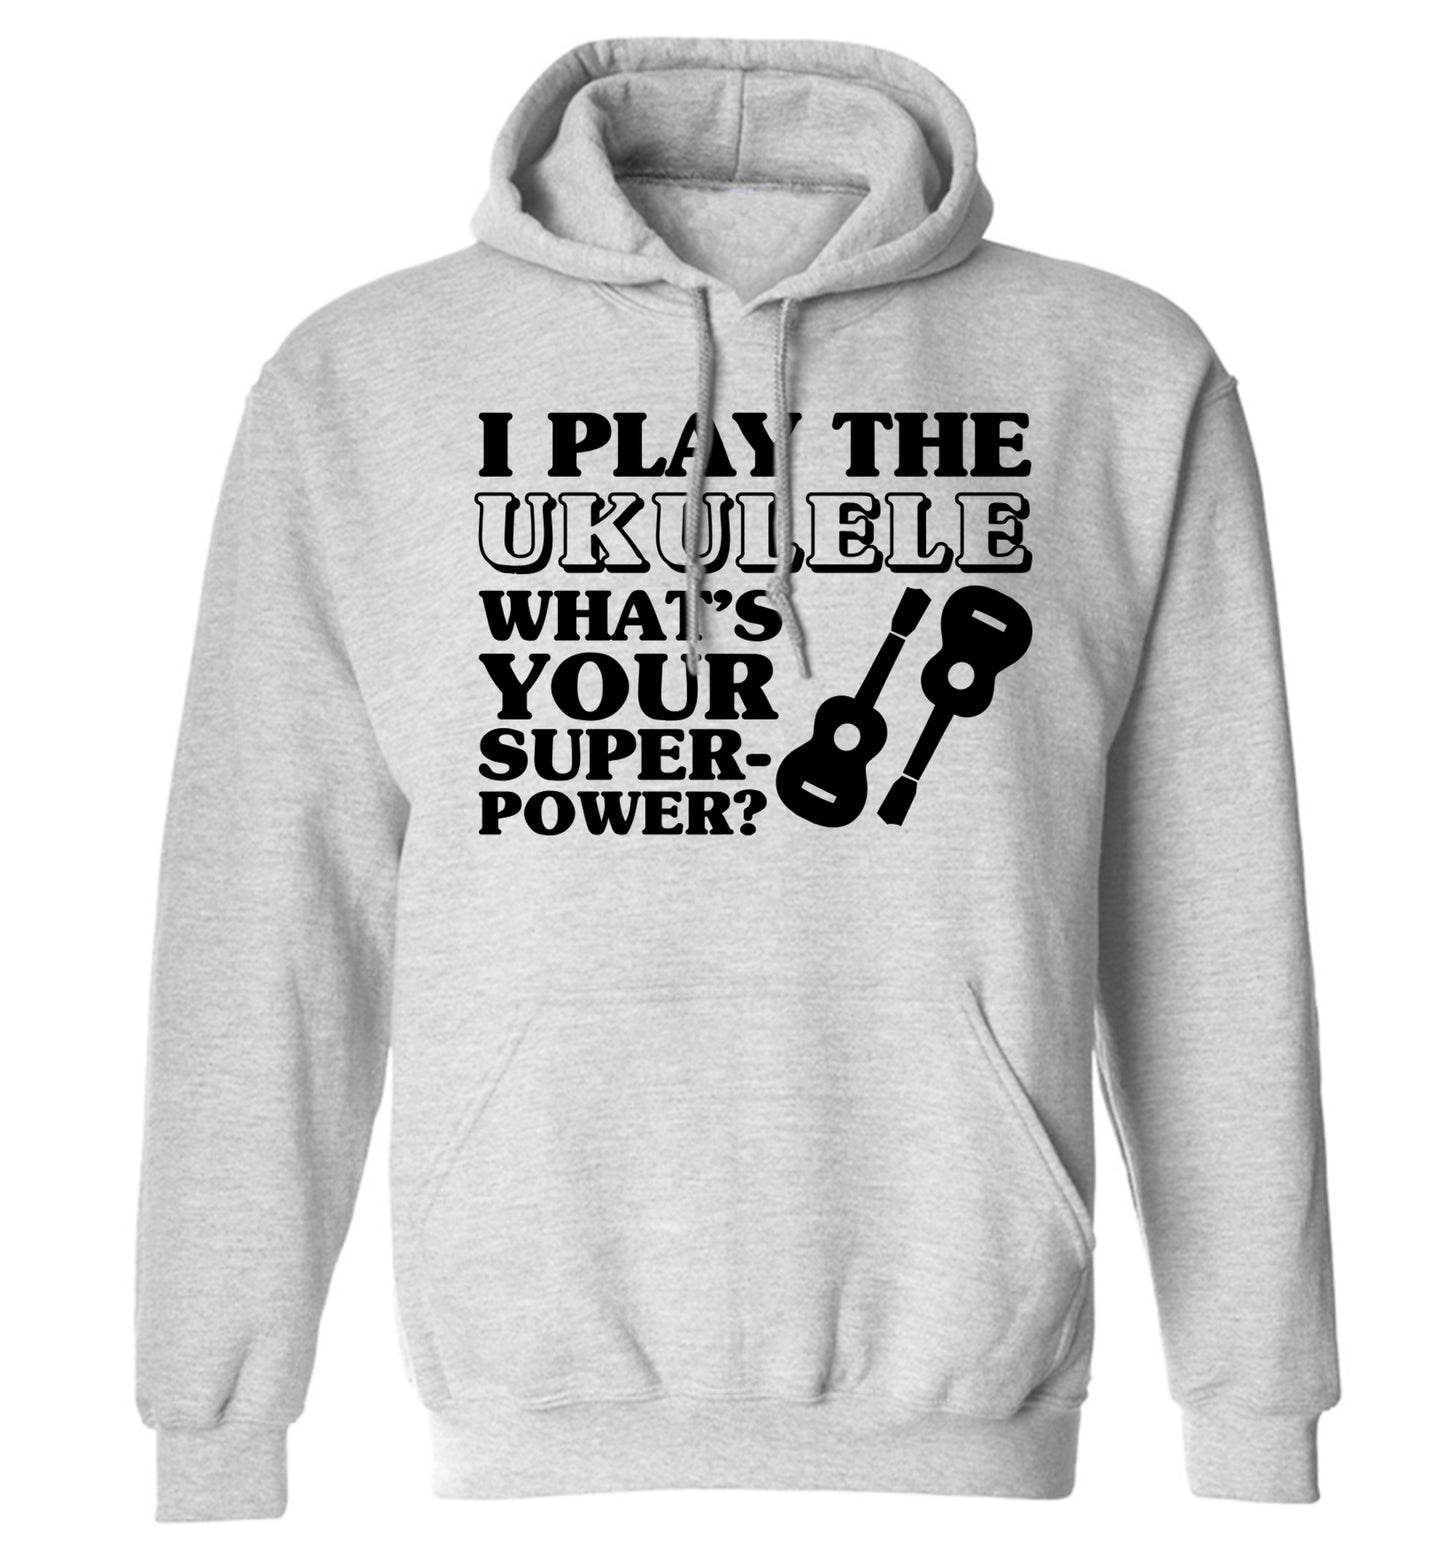 I play the ukulele what's your superpower? adults unisex grey hoodie 2XL